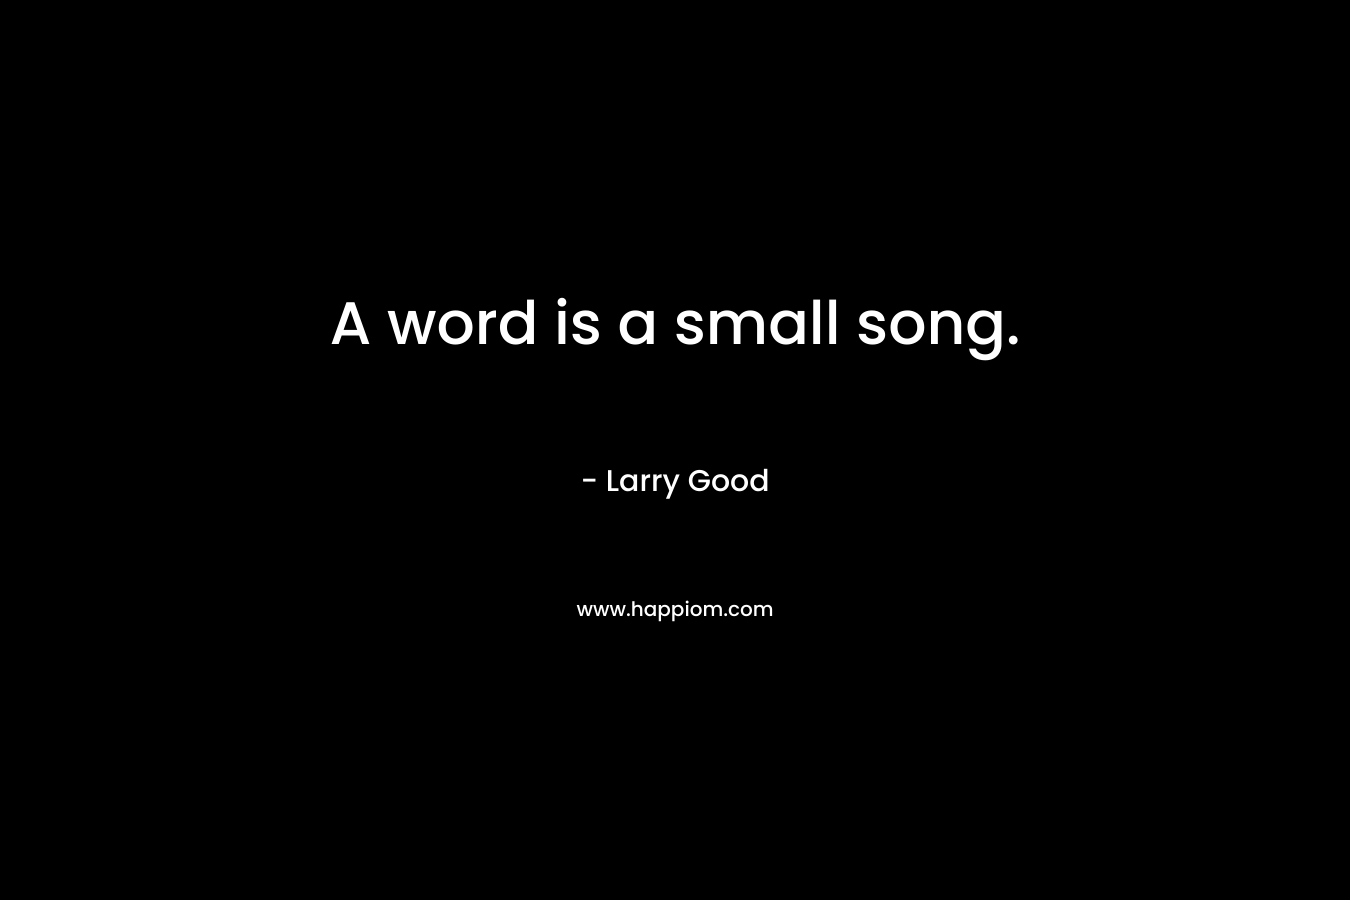 A word is a small song. – Larry Good